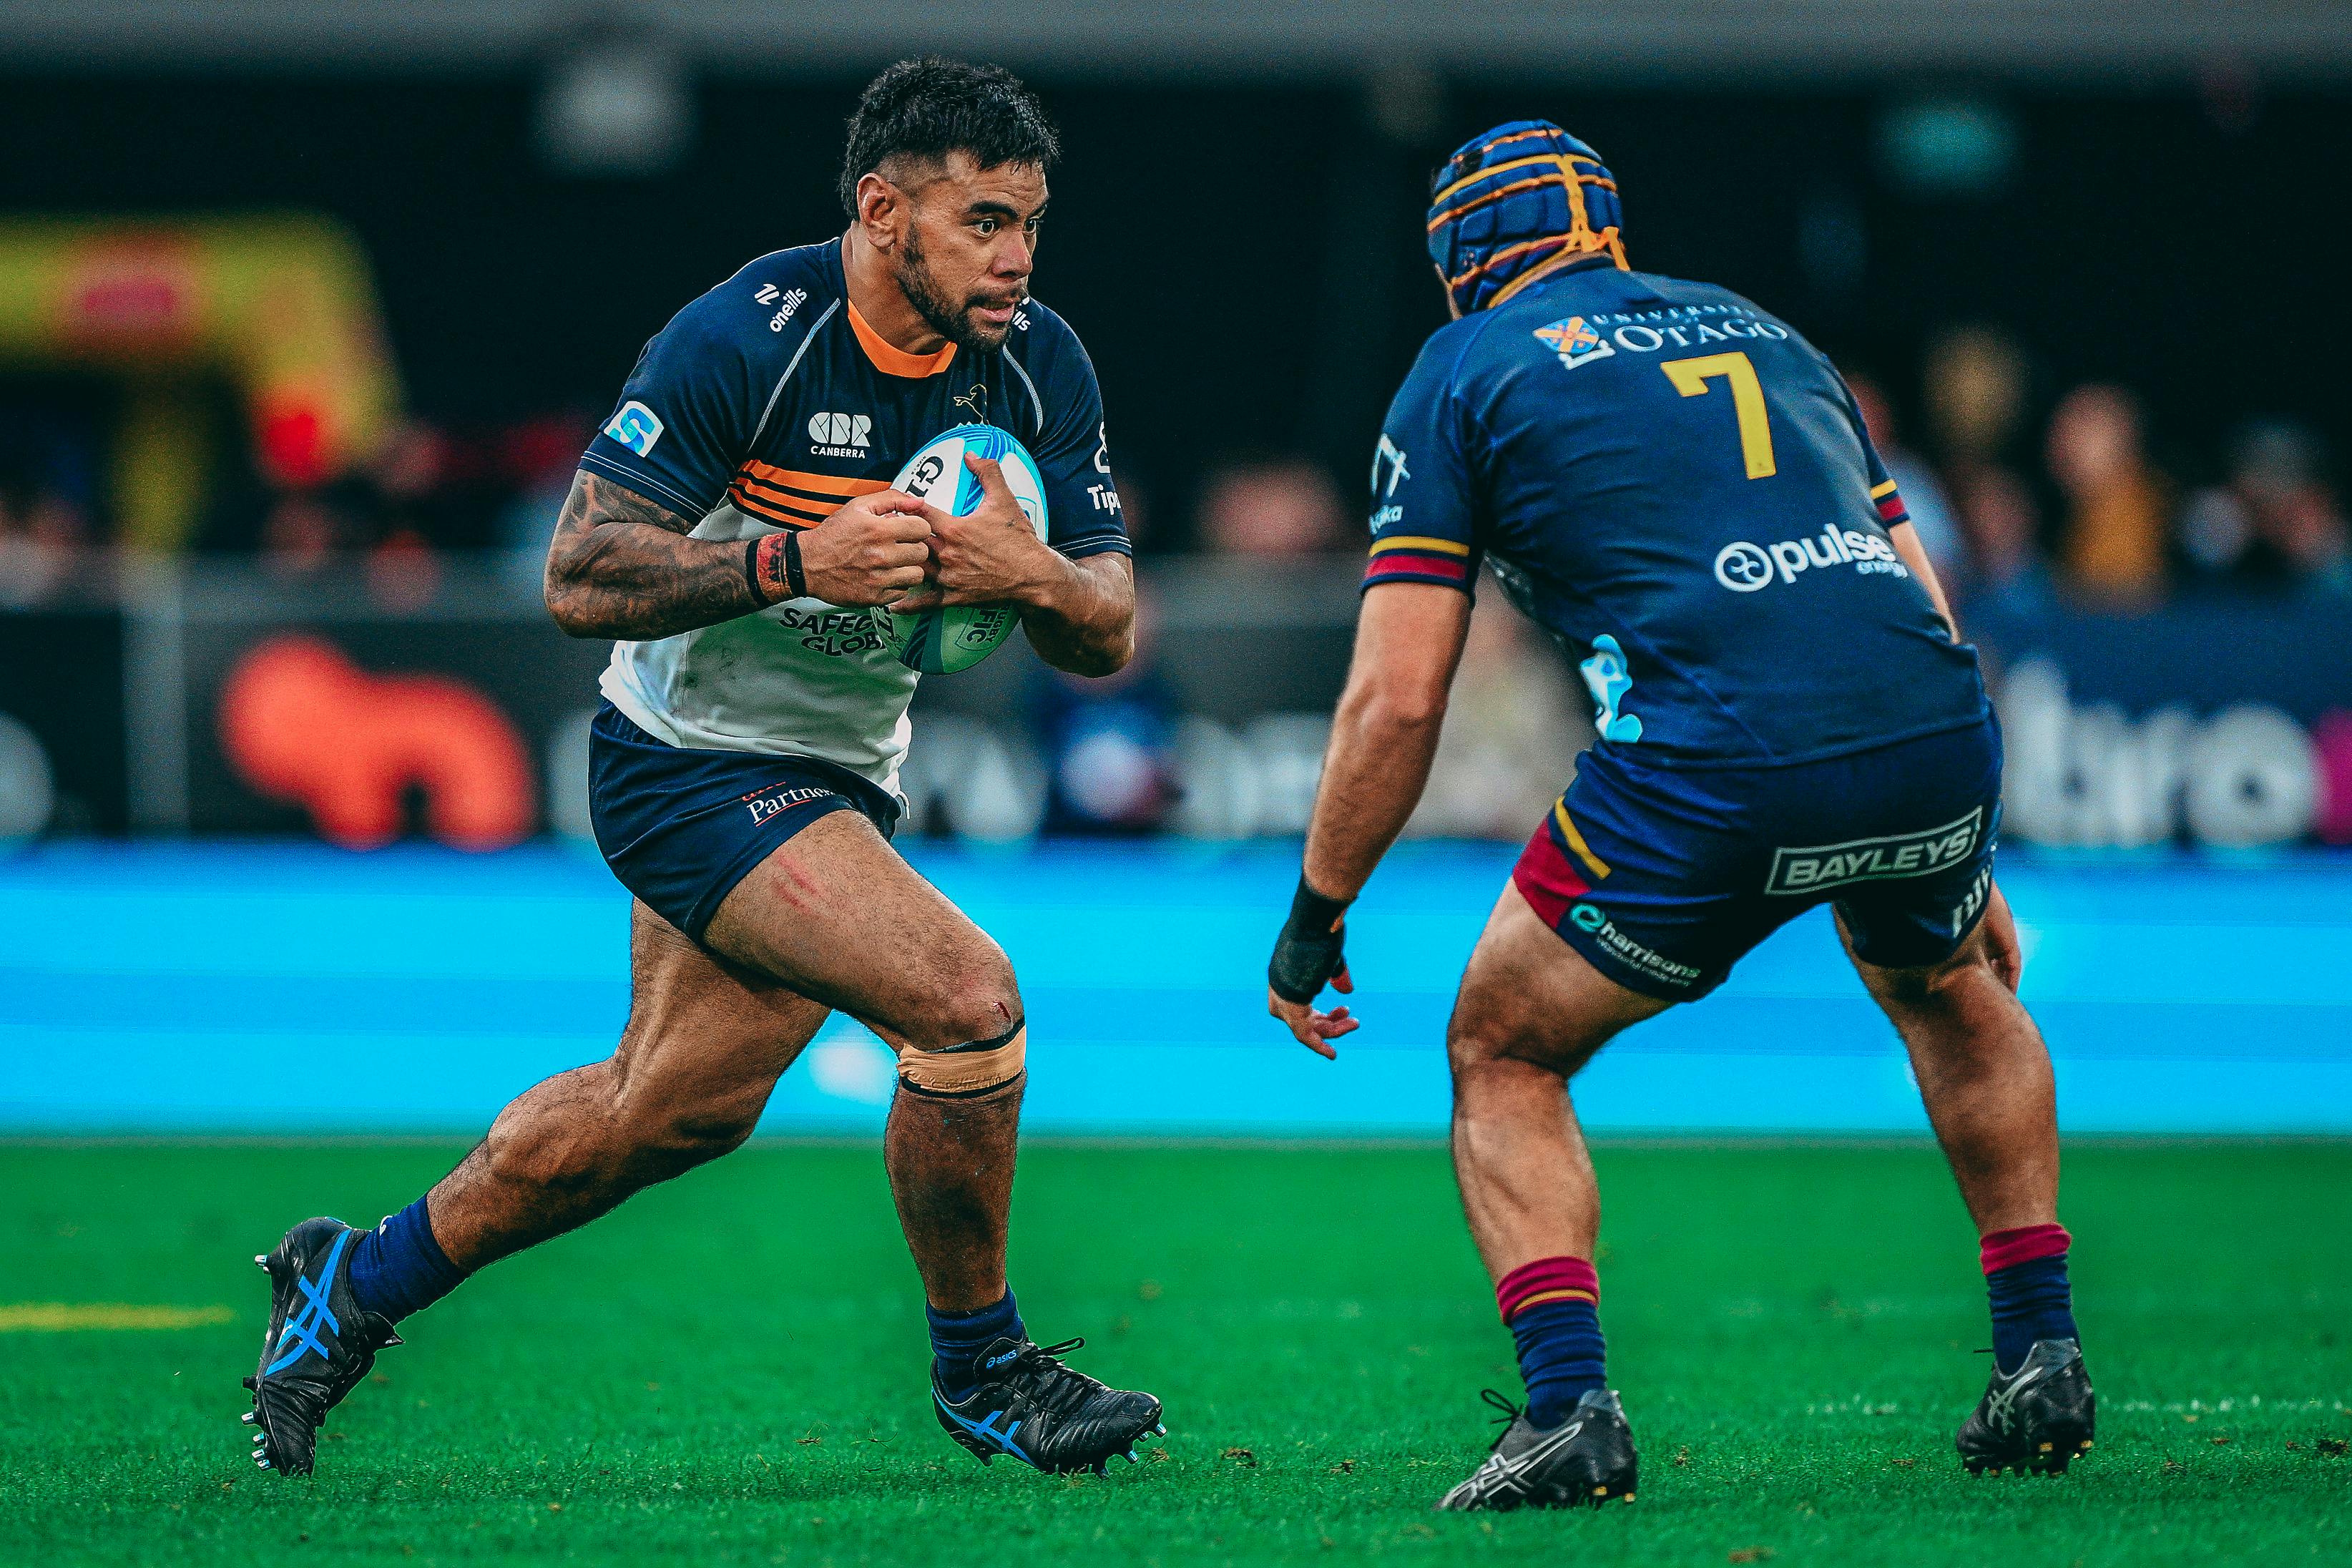 Kautai in action in Dunedin against the Highlanders this past weekend.